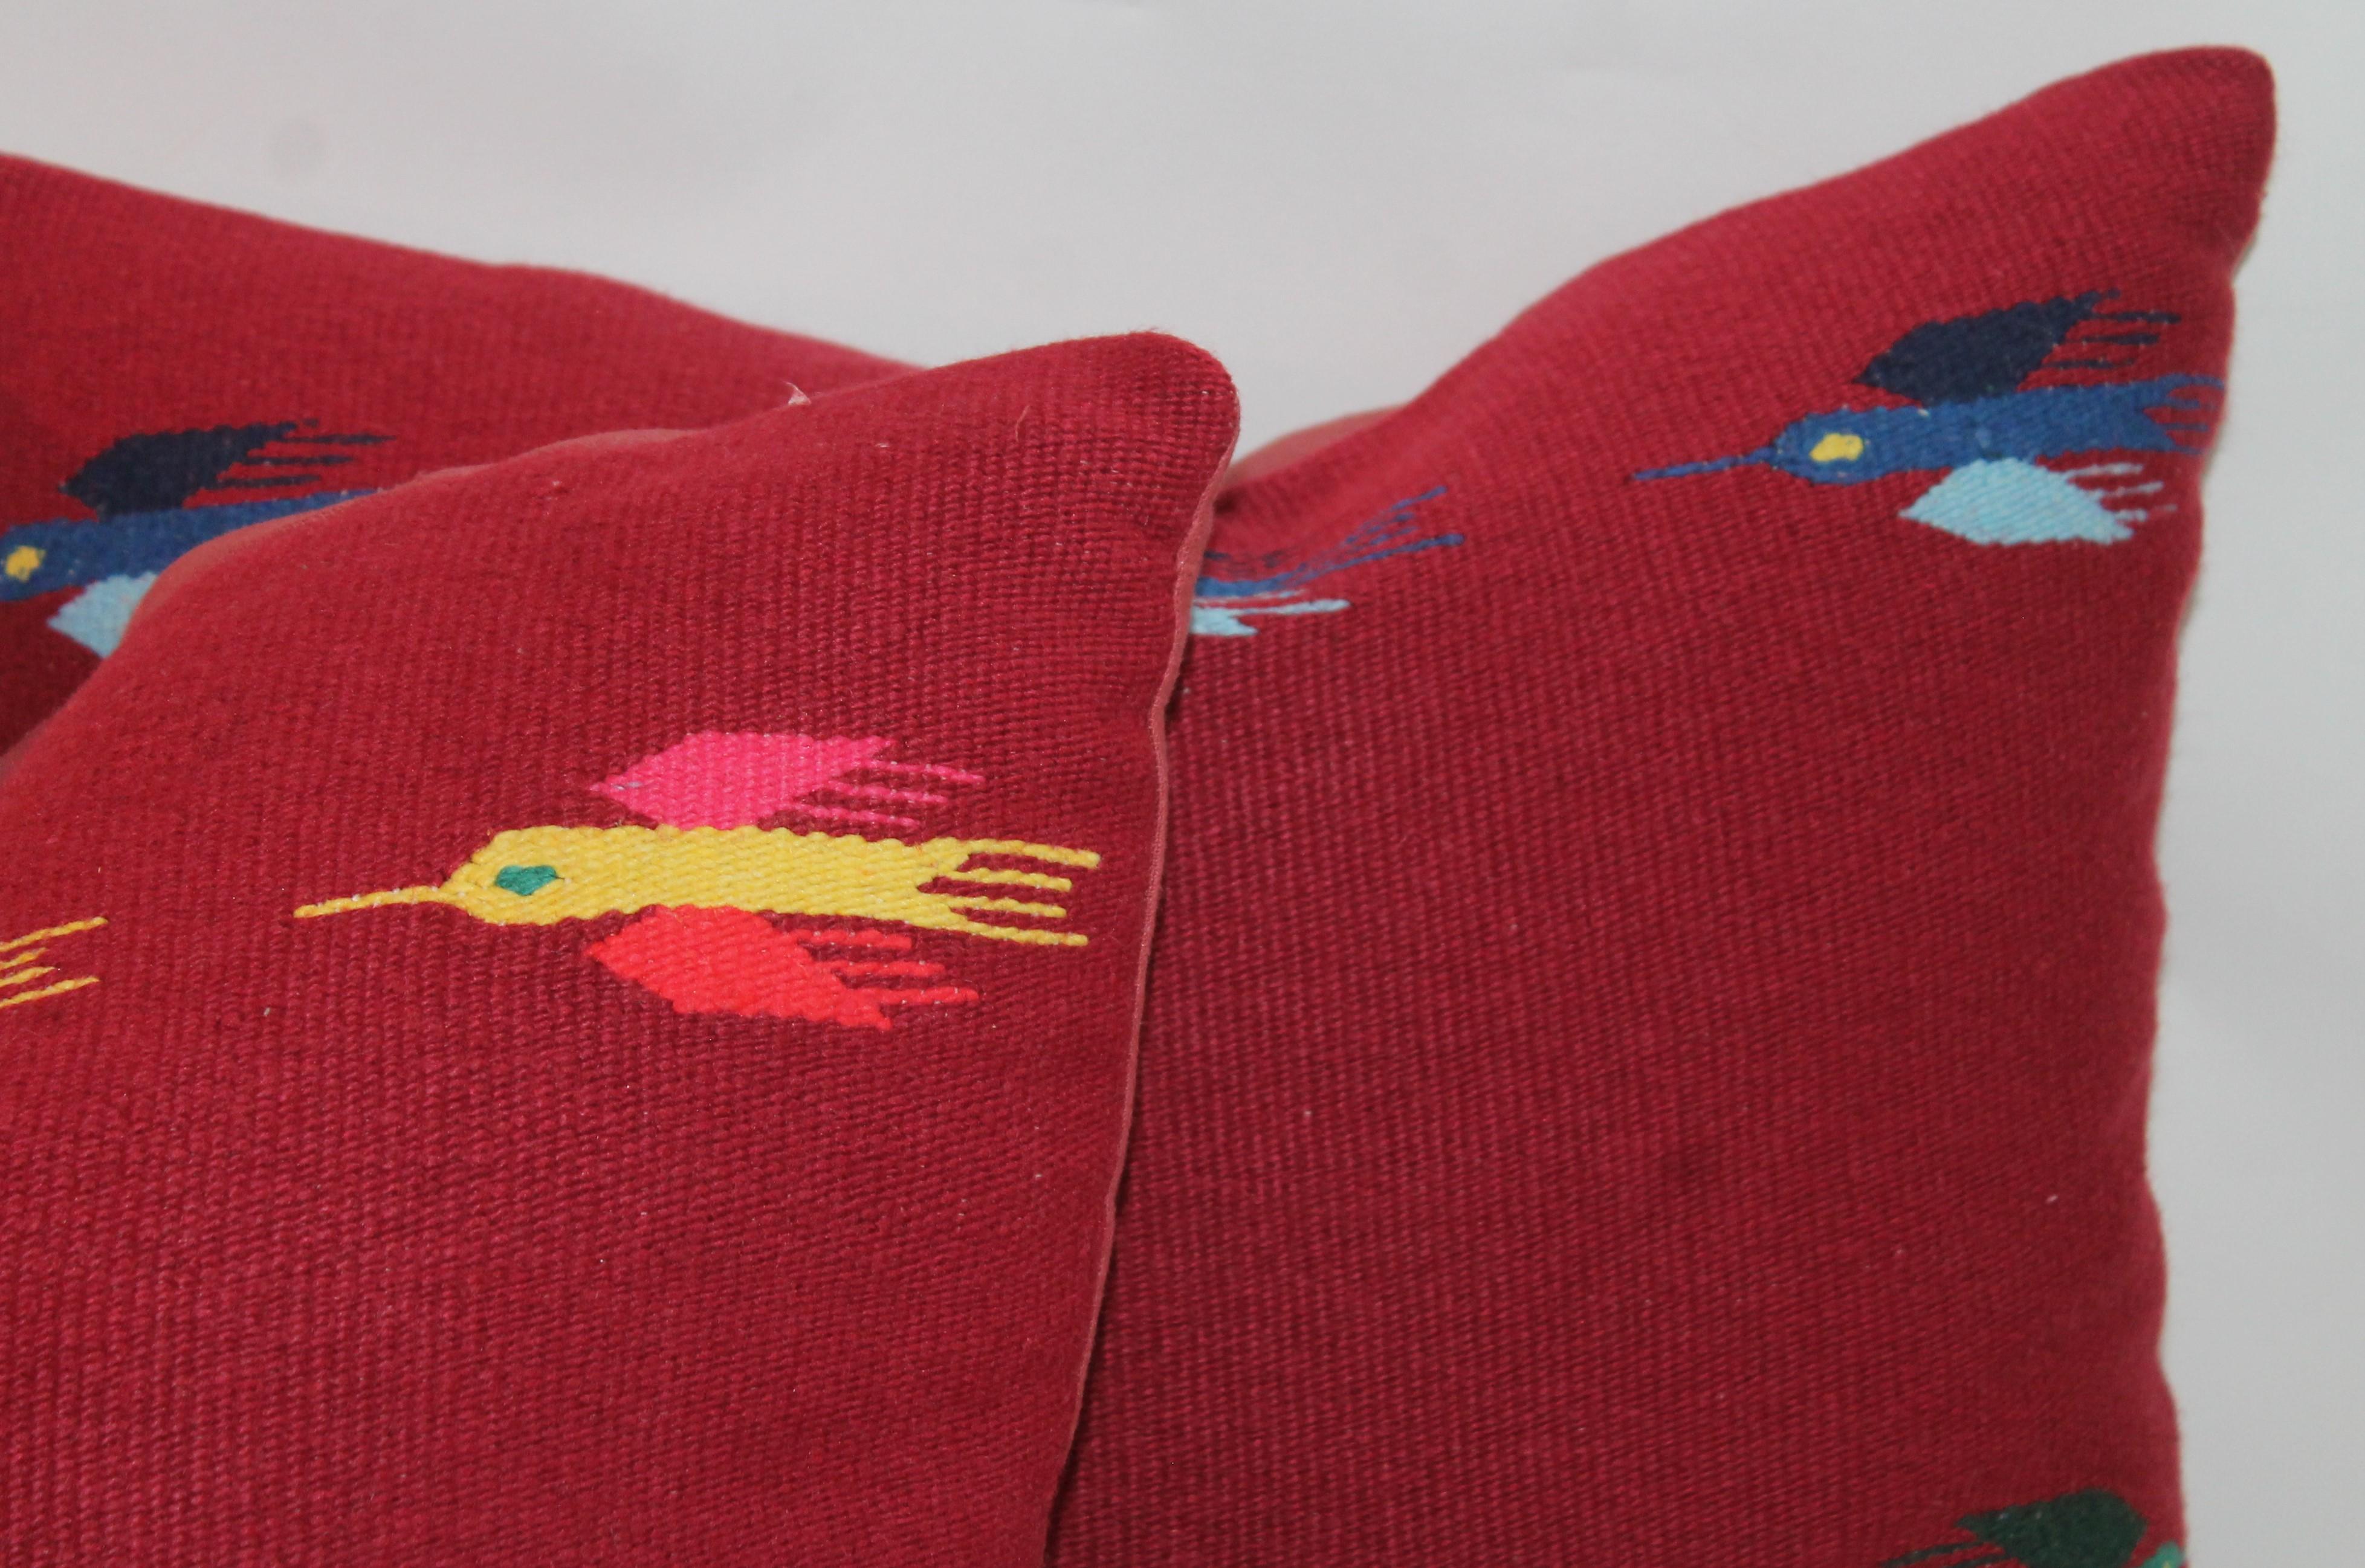 These cool Indian weaving pillows in the birds in flight pattern. The backing is in a cranberry cotton linen. All the colors in the Mexican serapes. Fantastic graphics. Two pairs in stock.